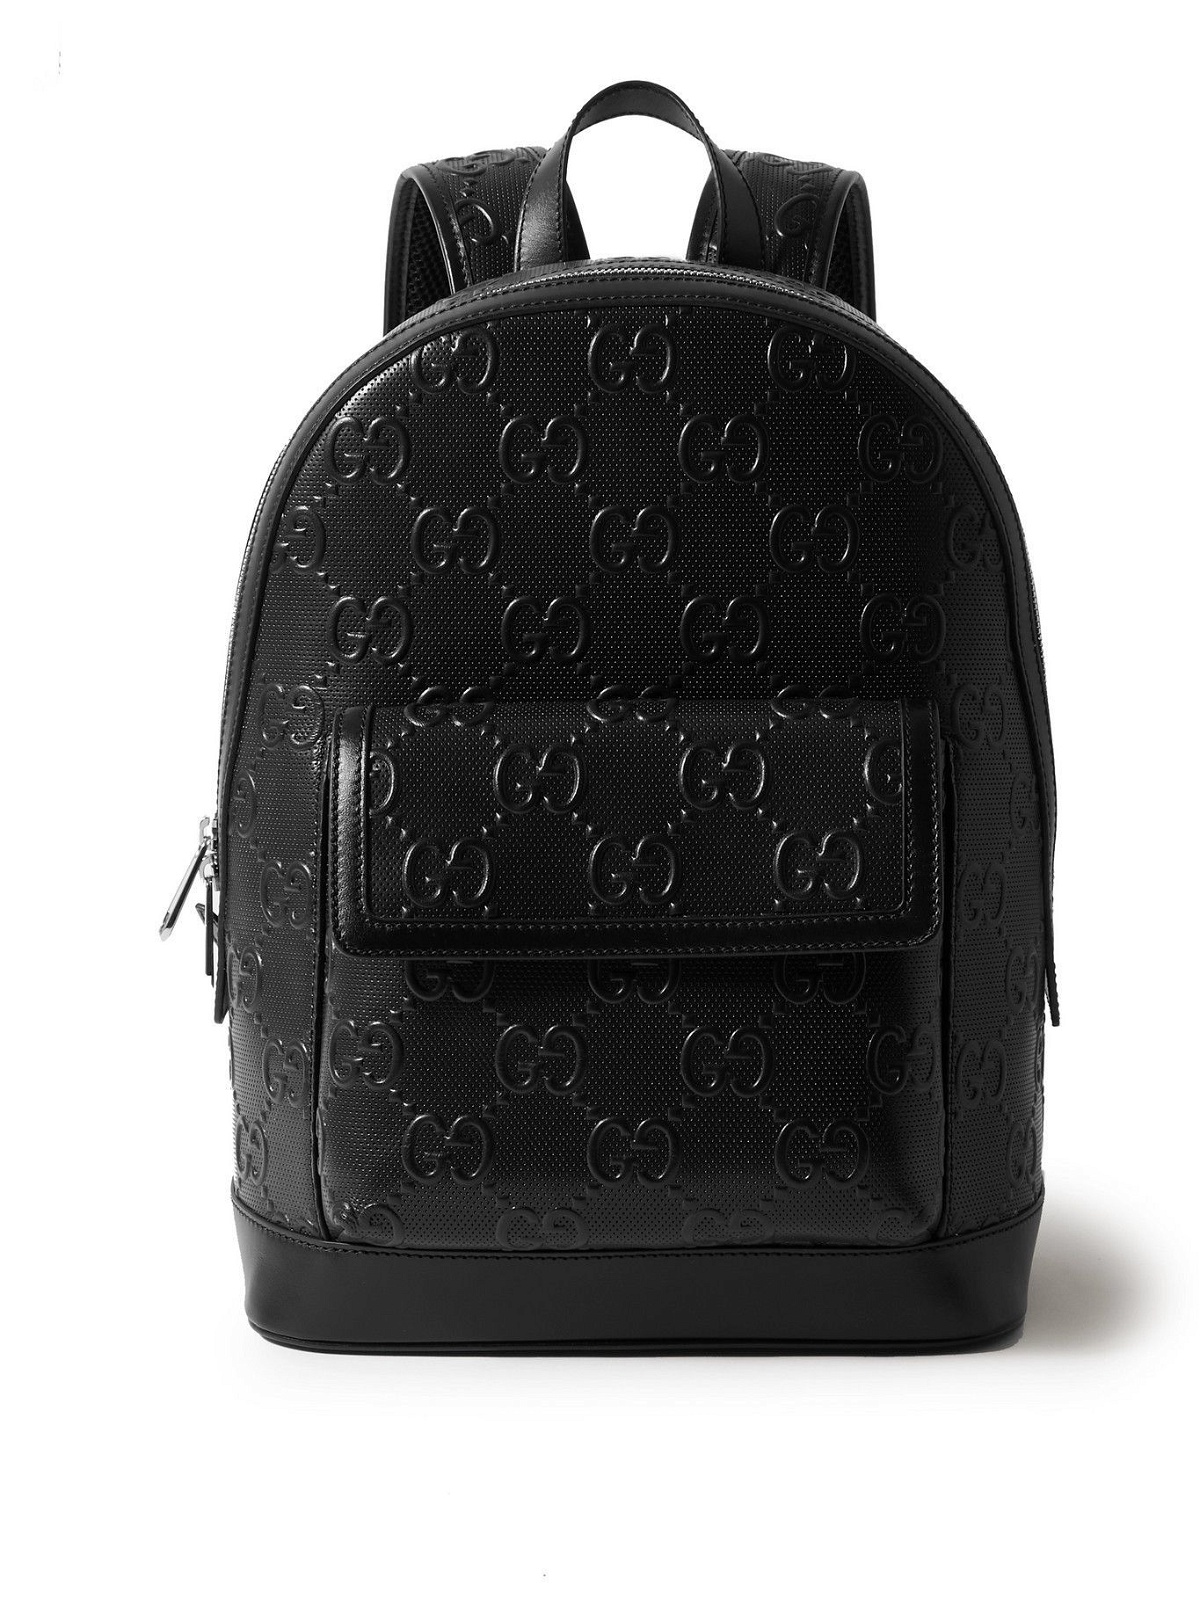 GUCCI - Logo-Embossed Perforated Leather Backpack Gucci